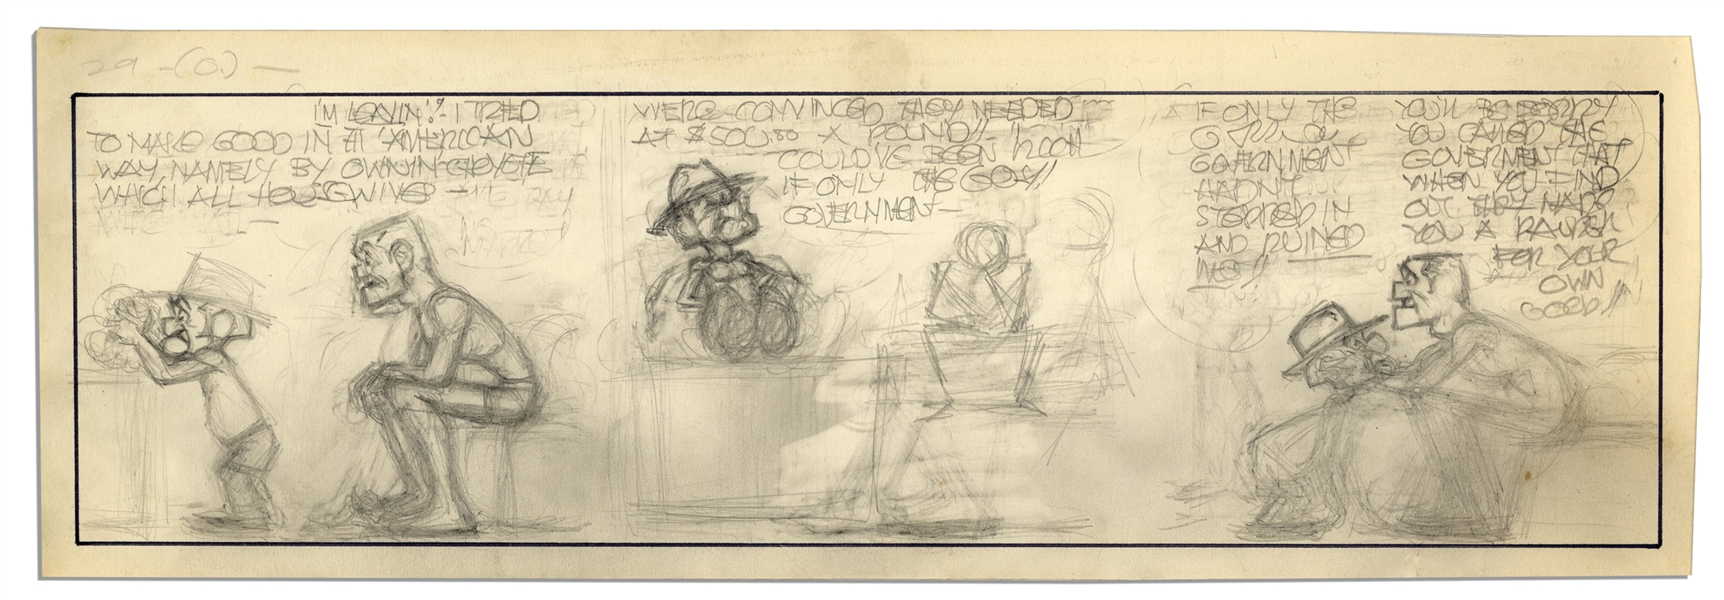 Unfinished Comic Strip by Al Capp in Pencil -- Undated & Untitled Strip is Likely For ''Li'l Abner''  -- 19.5'' x 6.25'' -- Minor Toning, Else Very Good -- From the Al Capp Estate